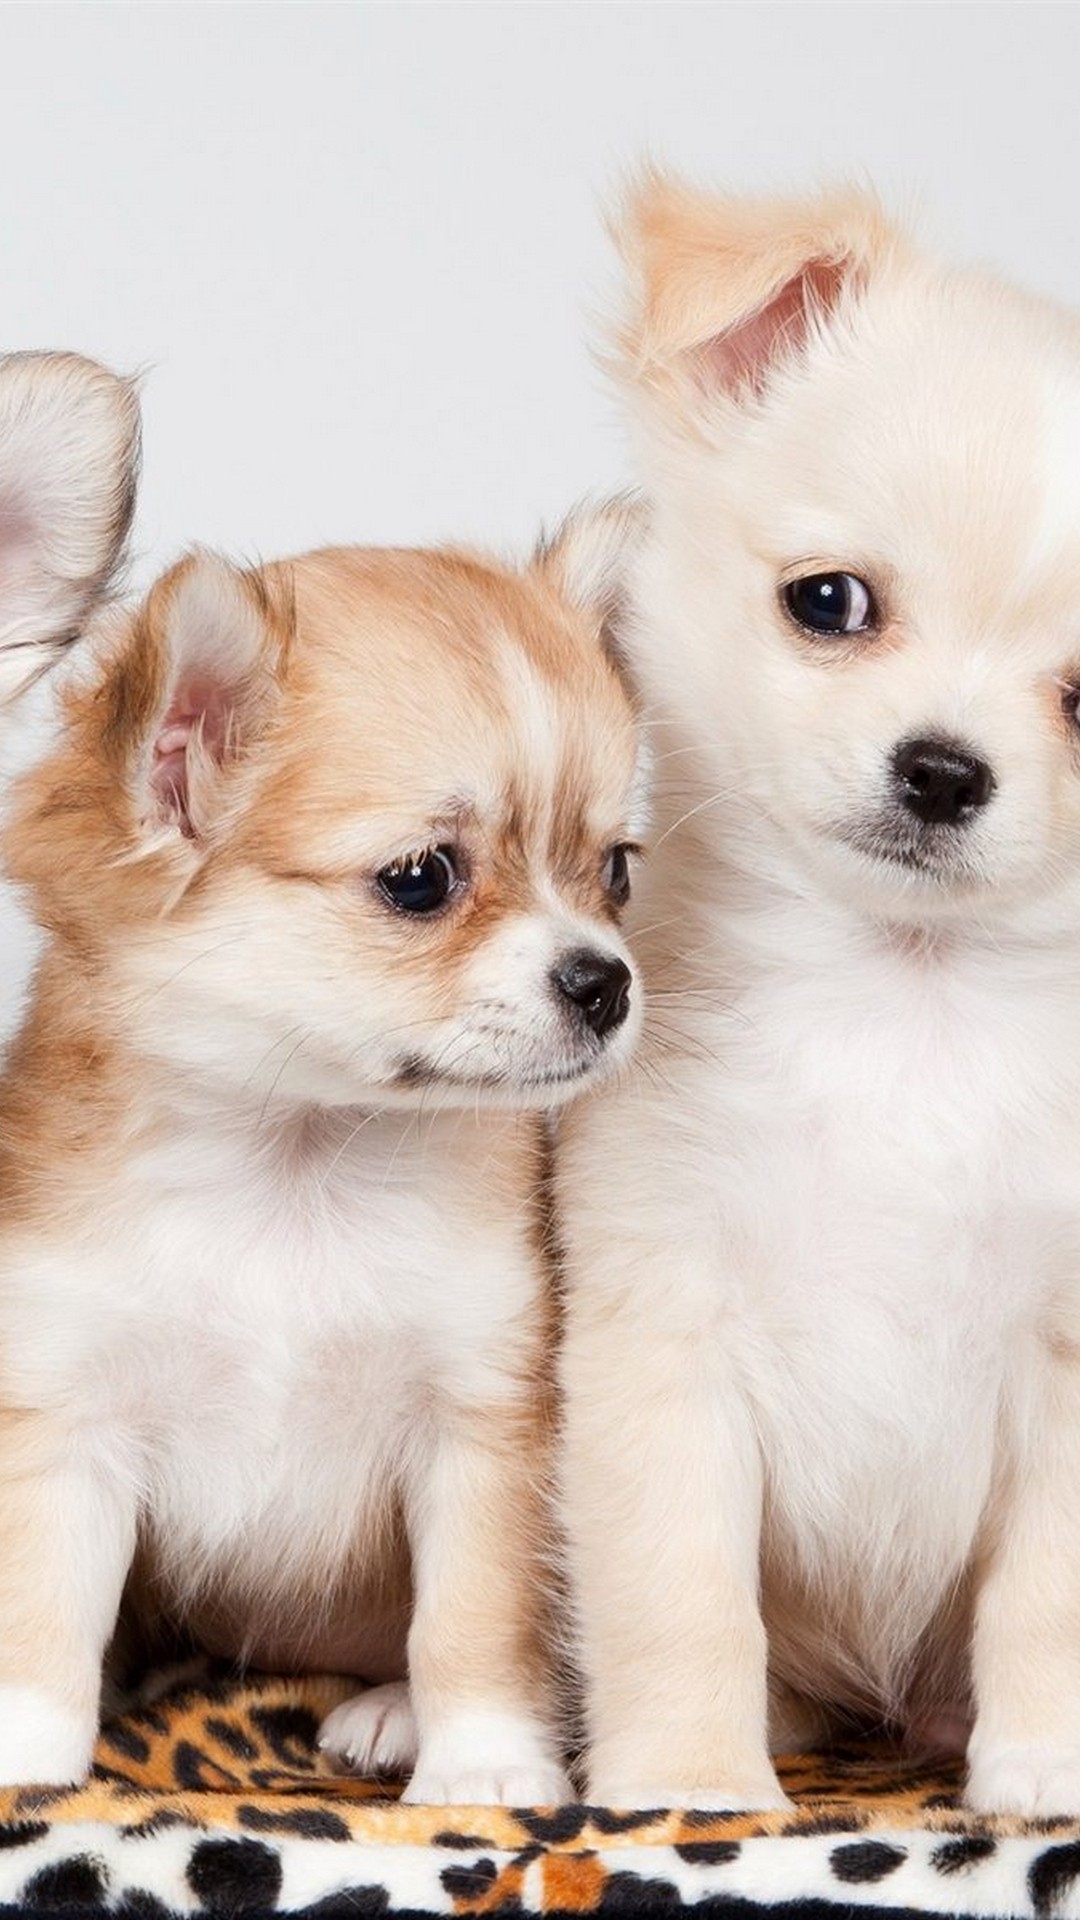 Puppies Android Wallpaper with HD resolution 1080x1920